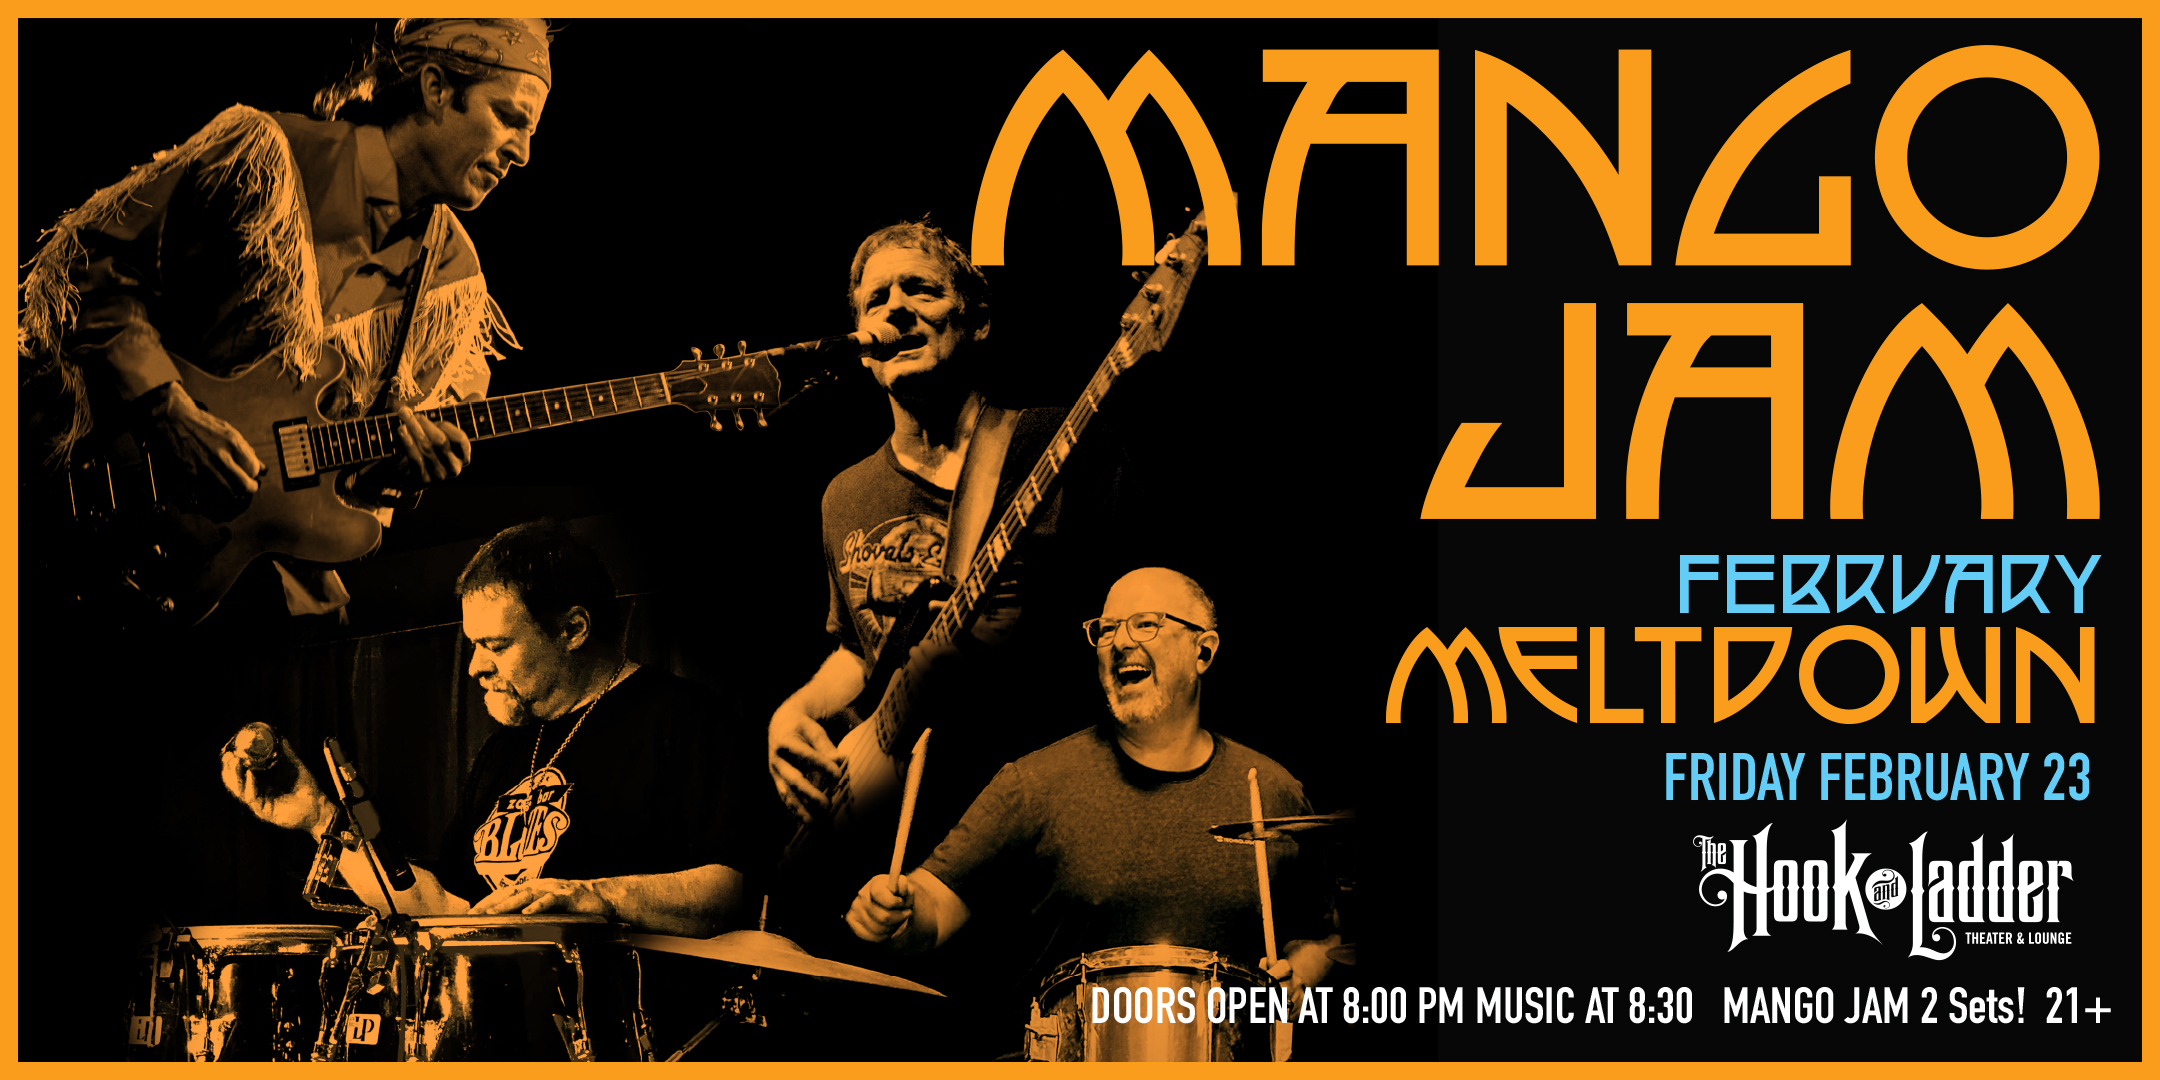 An Evening with MANGO JAM 2 Sets! Friday, February 23 The Hook and Ladder Theater Doors 8:00pm :: Music 8:30pm :: 21+ General Admission: $12 ADV / $17 DOS